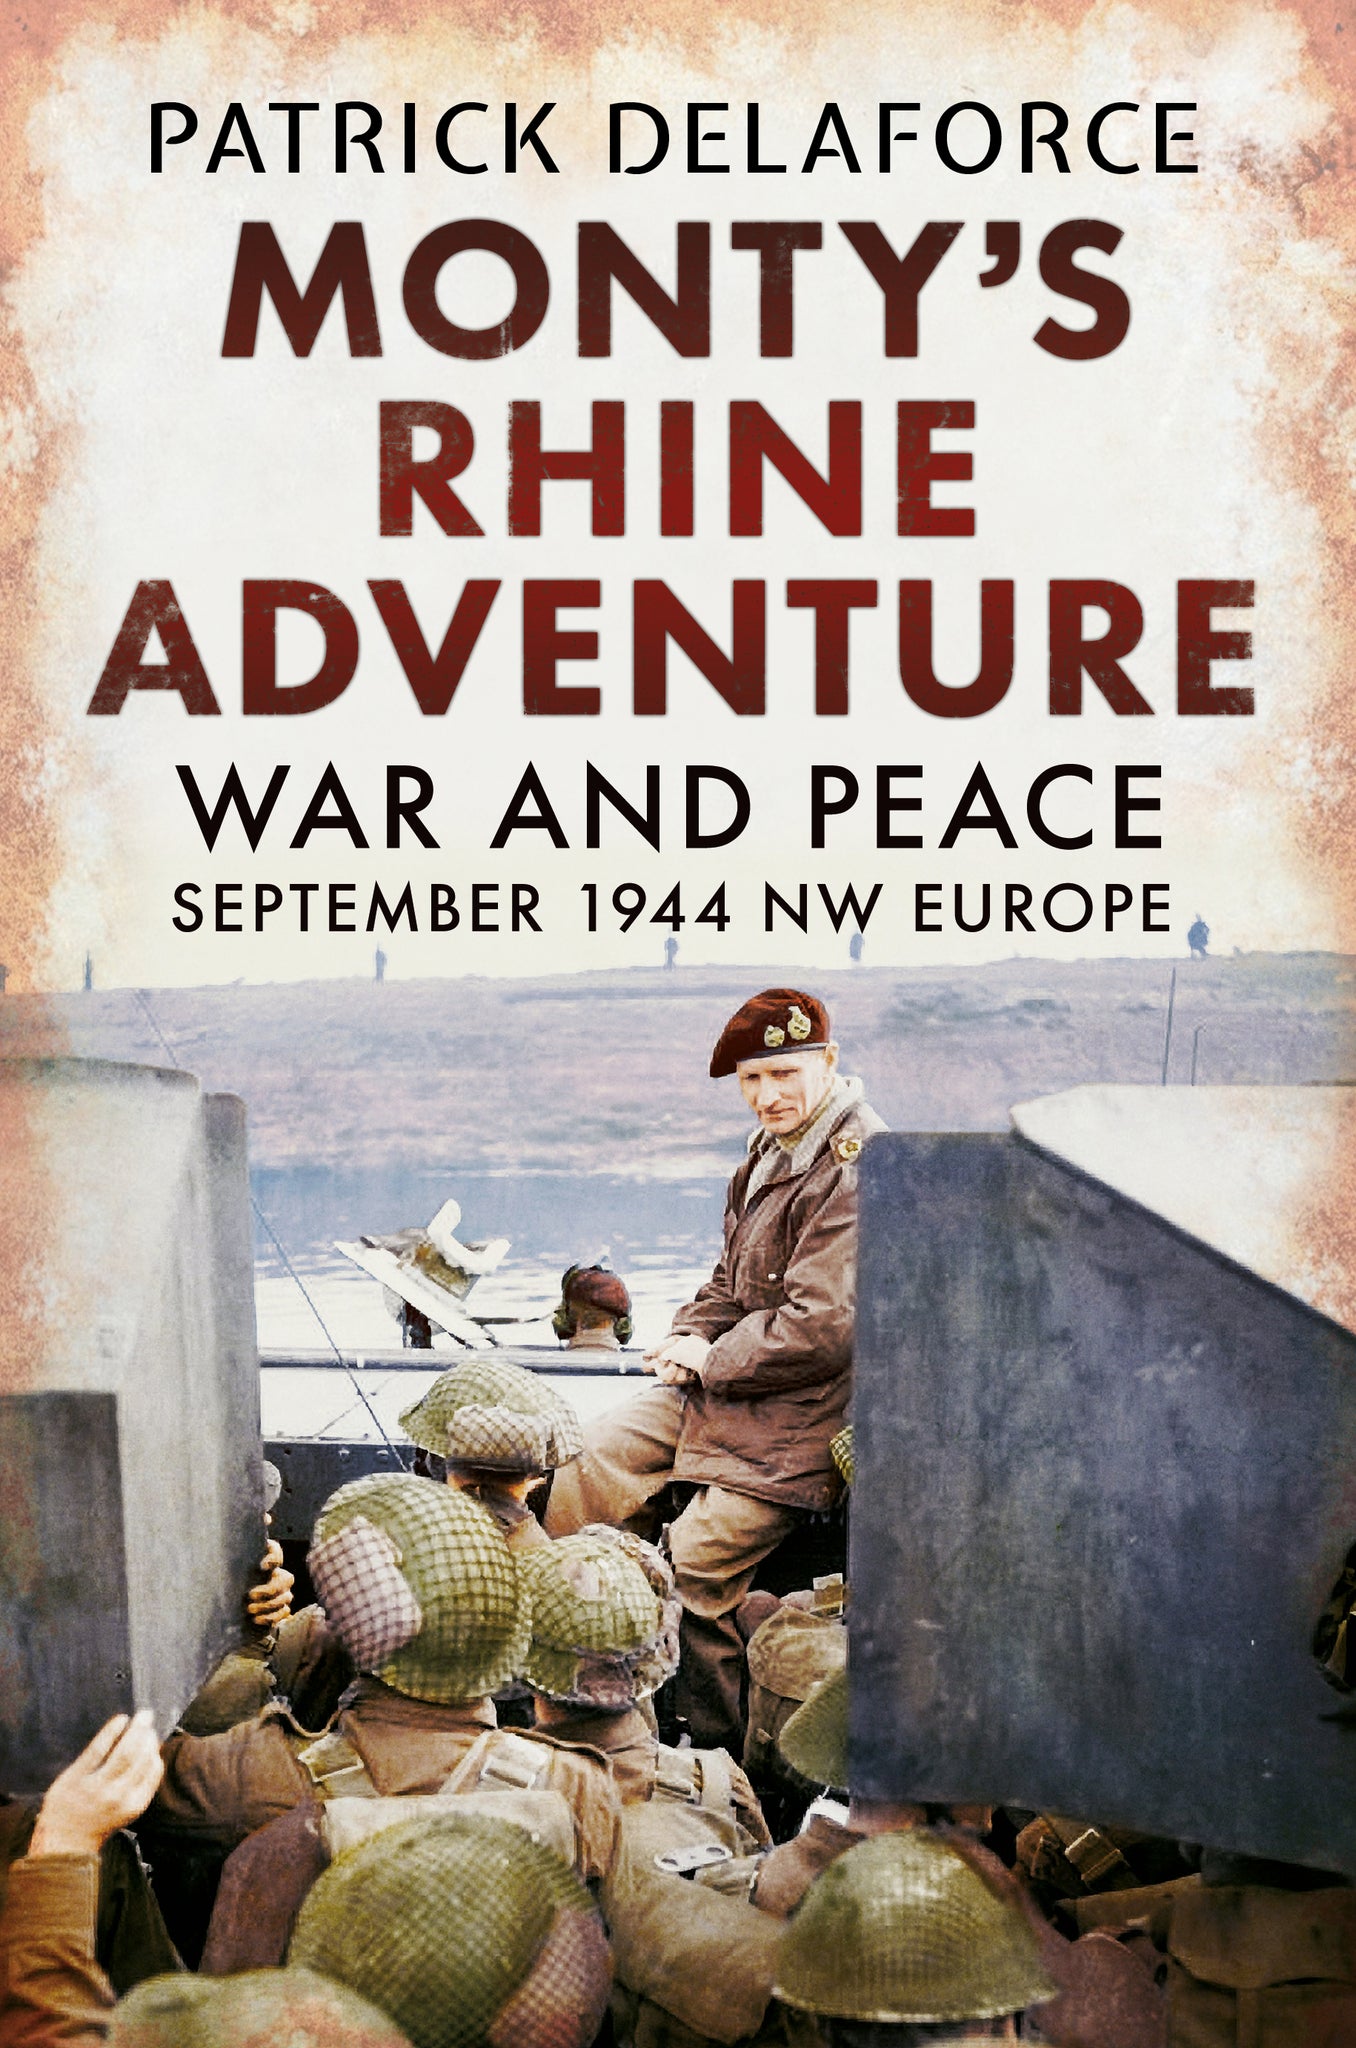 Monty's Rhine Adventure: War and Peace September 1944 NW Europe